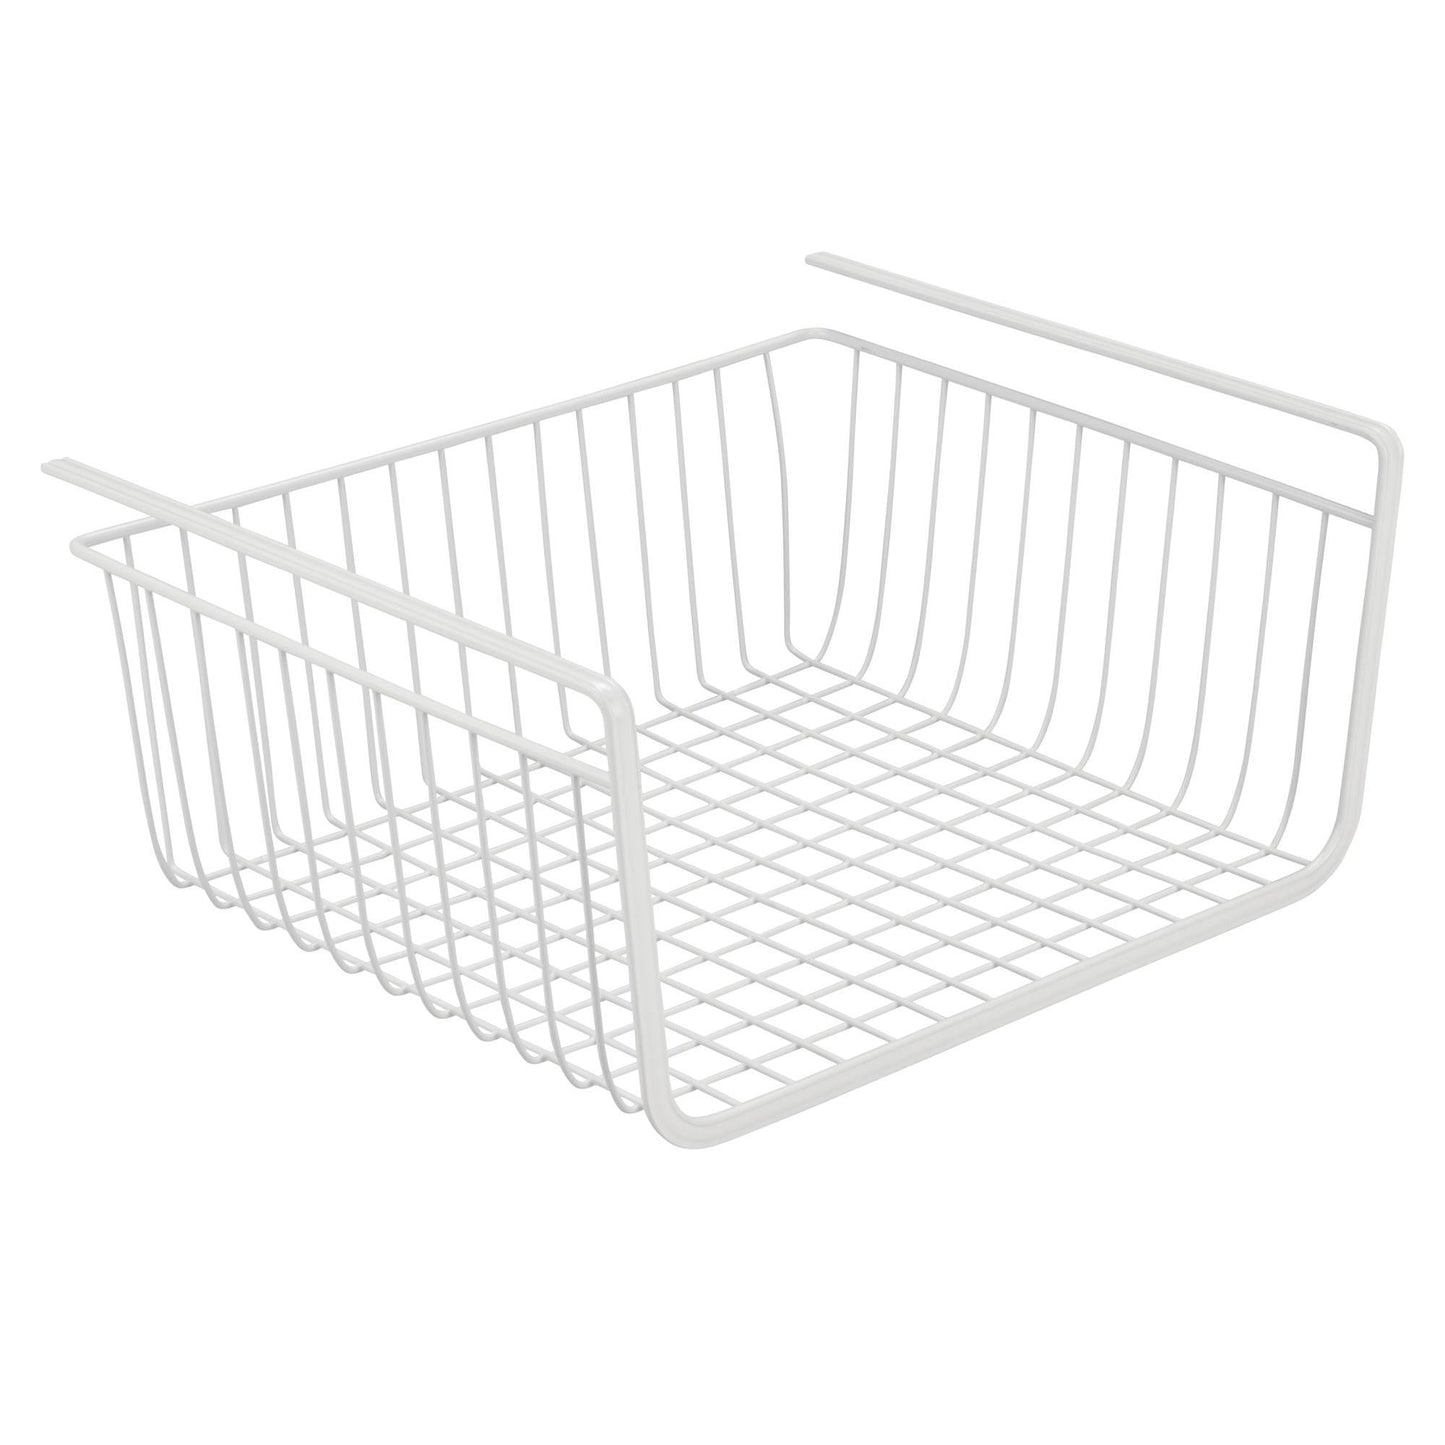 Storage organizer mdesign household metal under shelf hanging storage bin basket with open front for organizing kitchen cabinets cupboards pantries shelves large 2 pack white